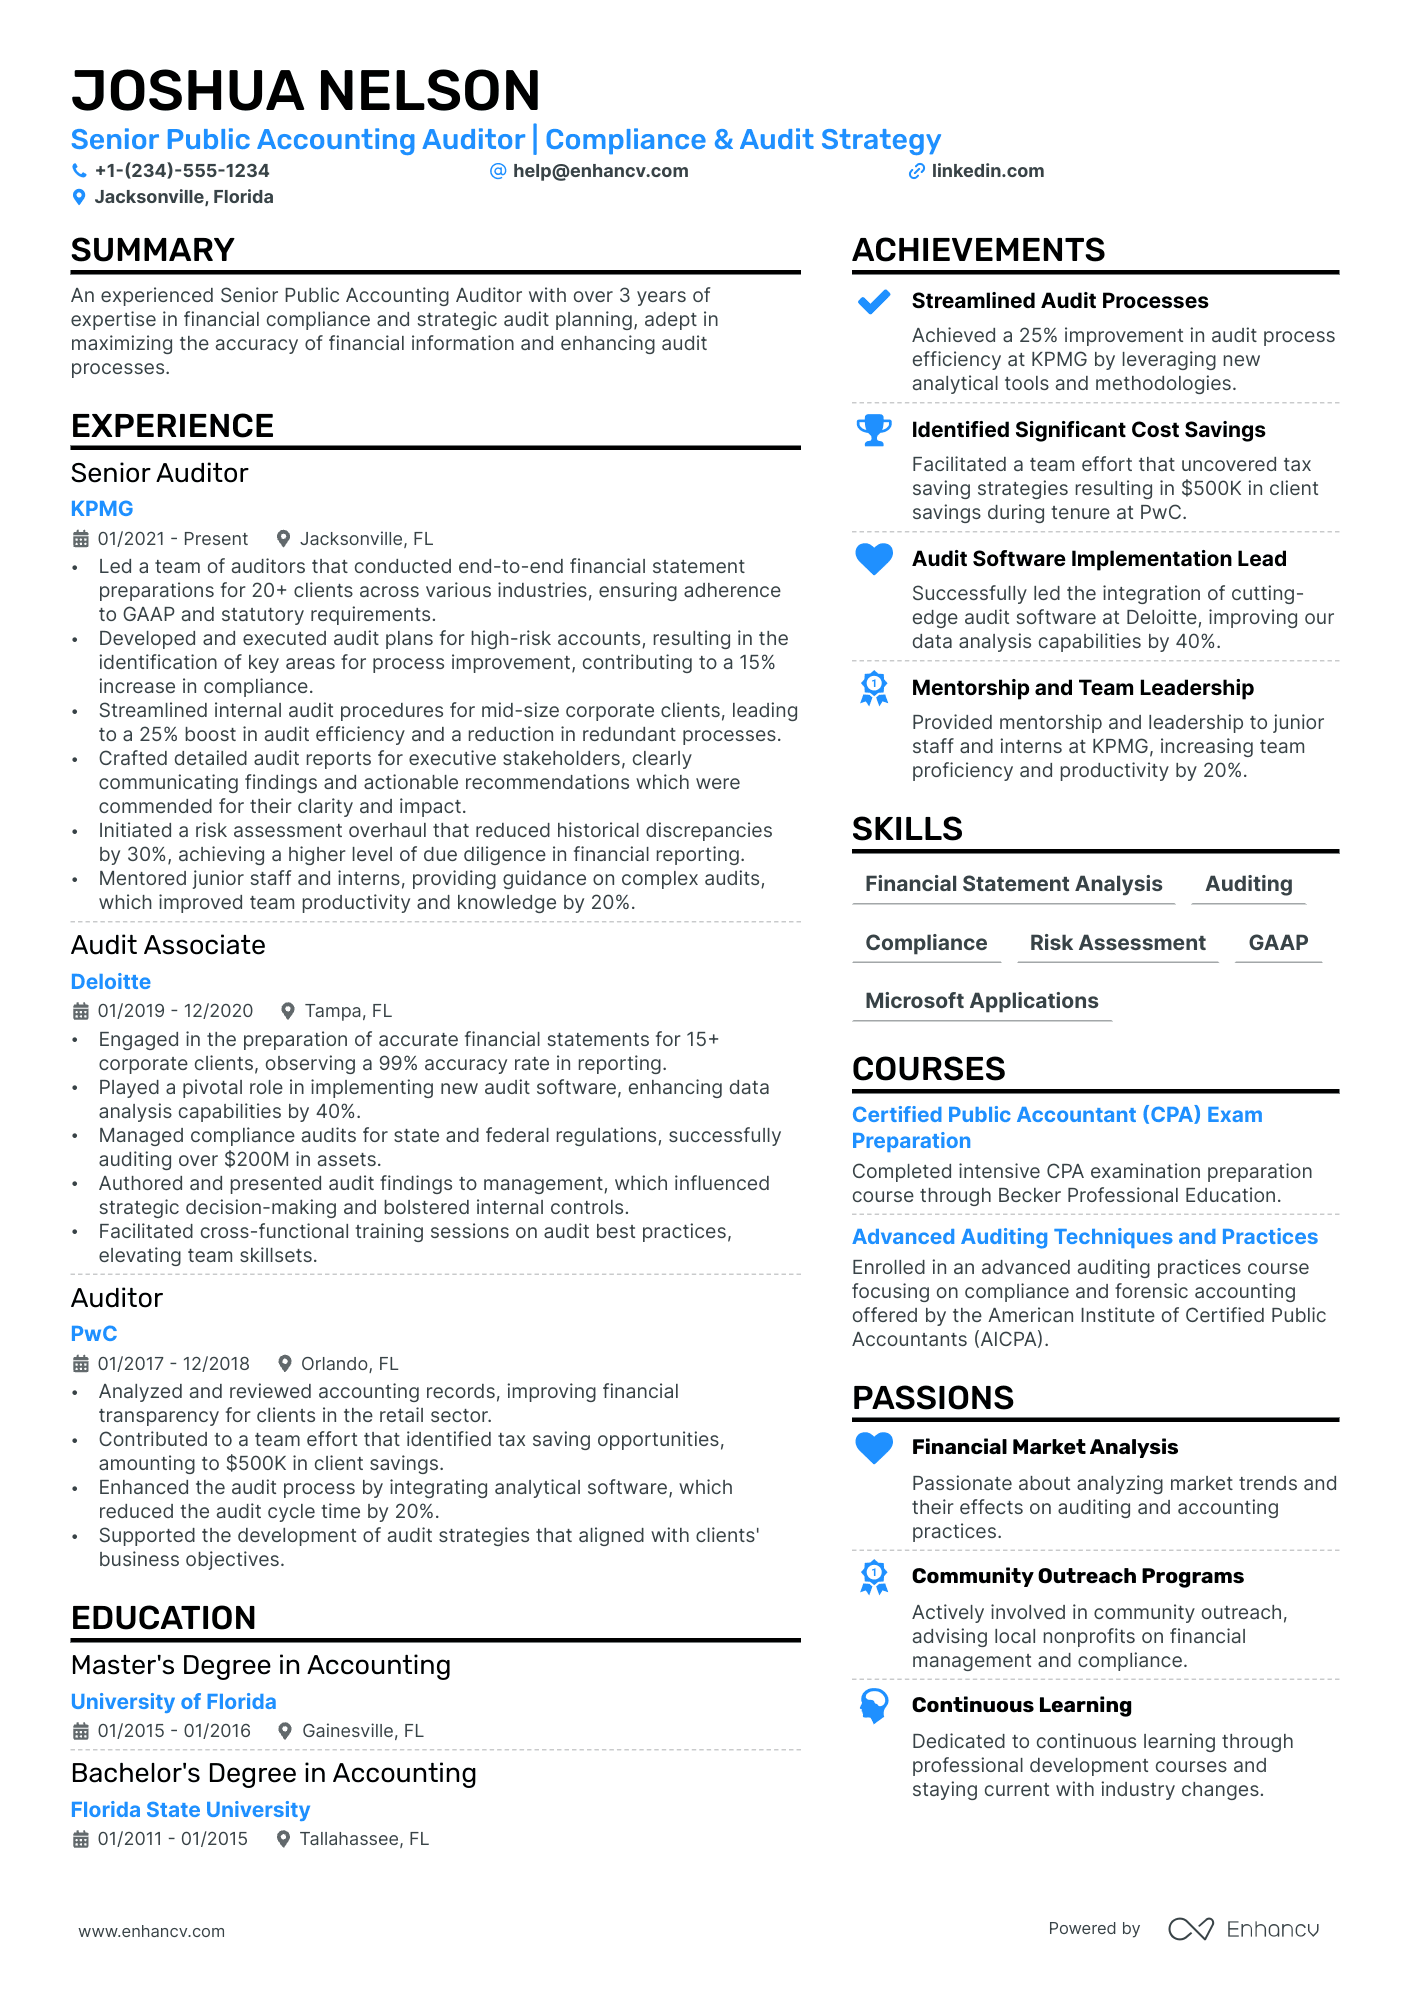 Public Accounting Auditor resume example